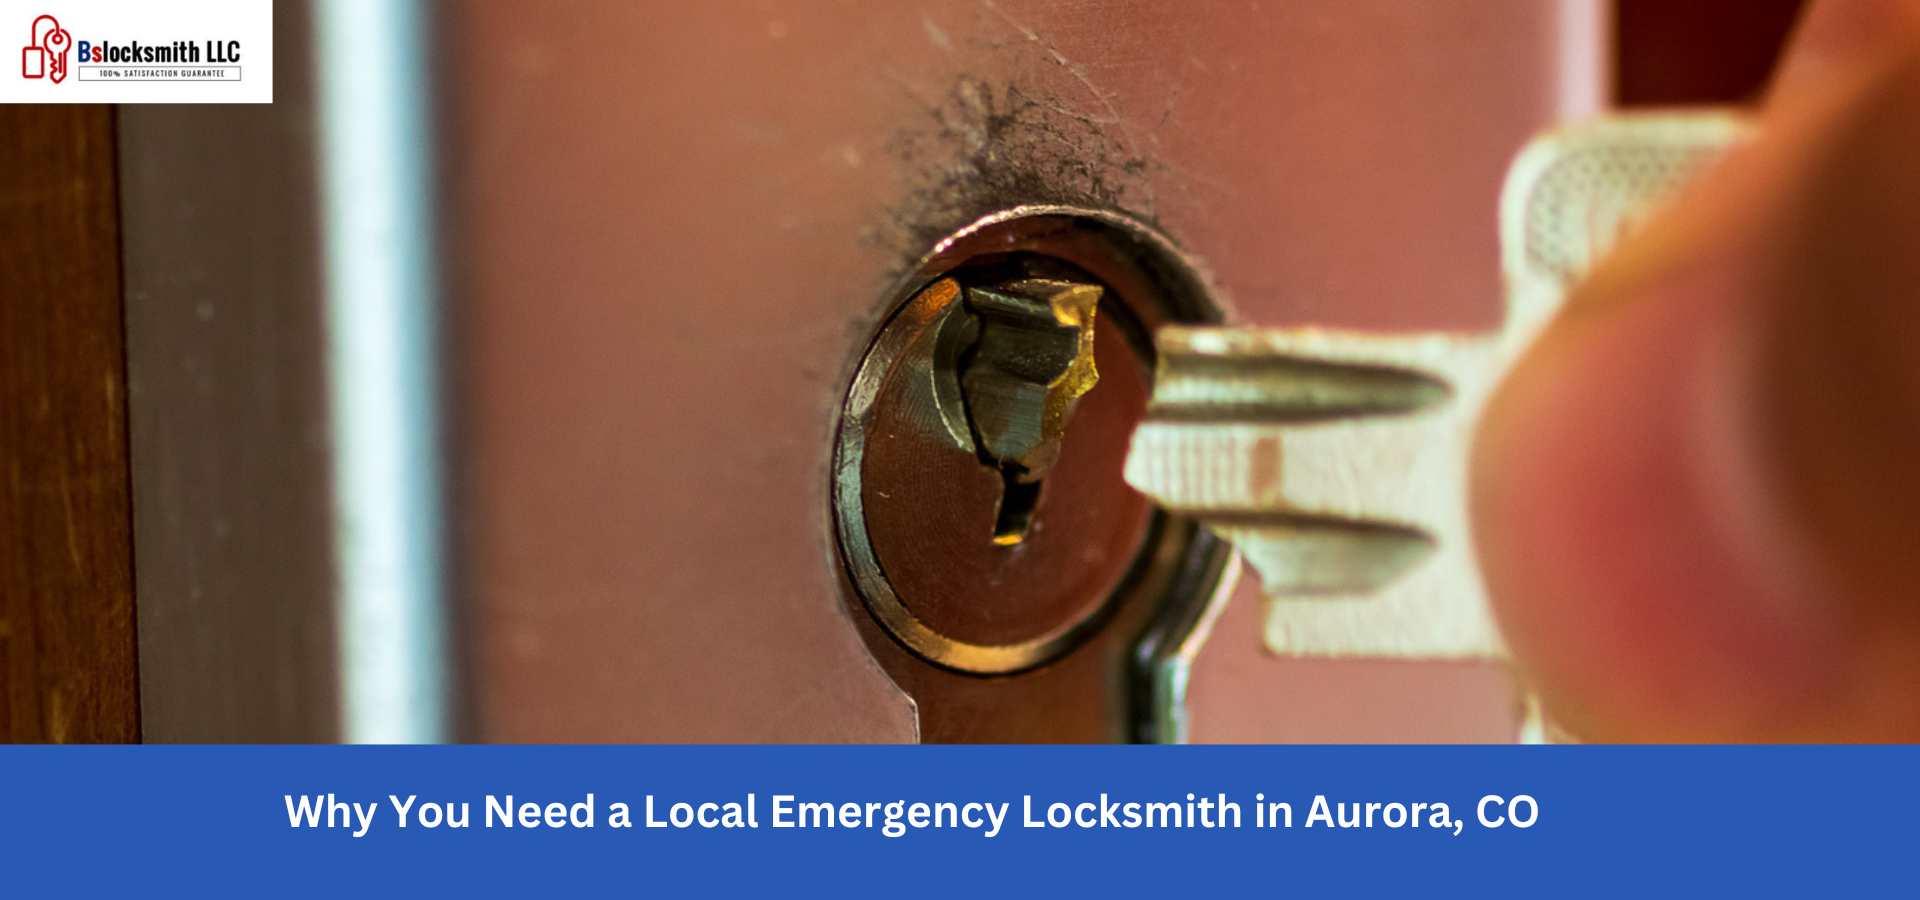 BS Locksmith local emergency locksmith in Aurora, CO providing prompt and reliable services.